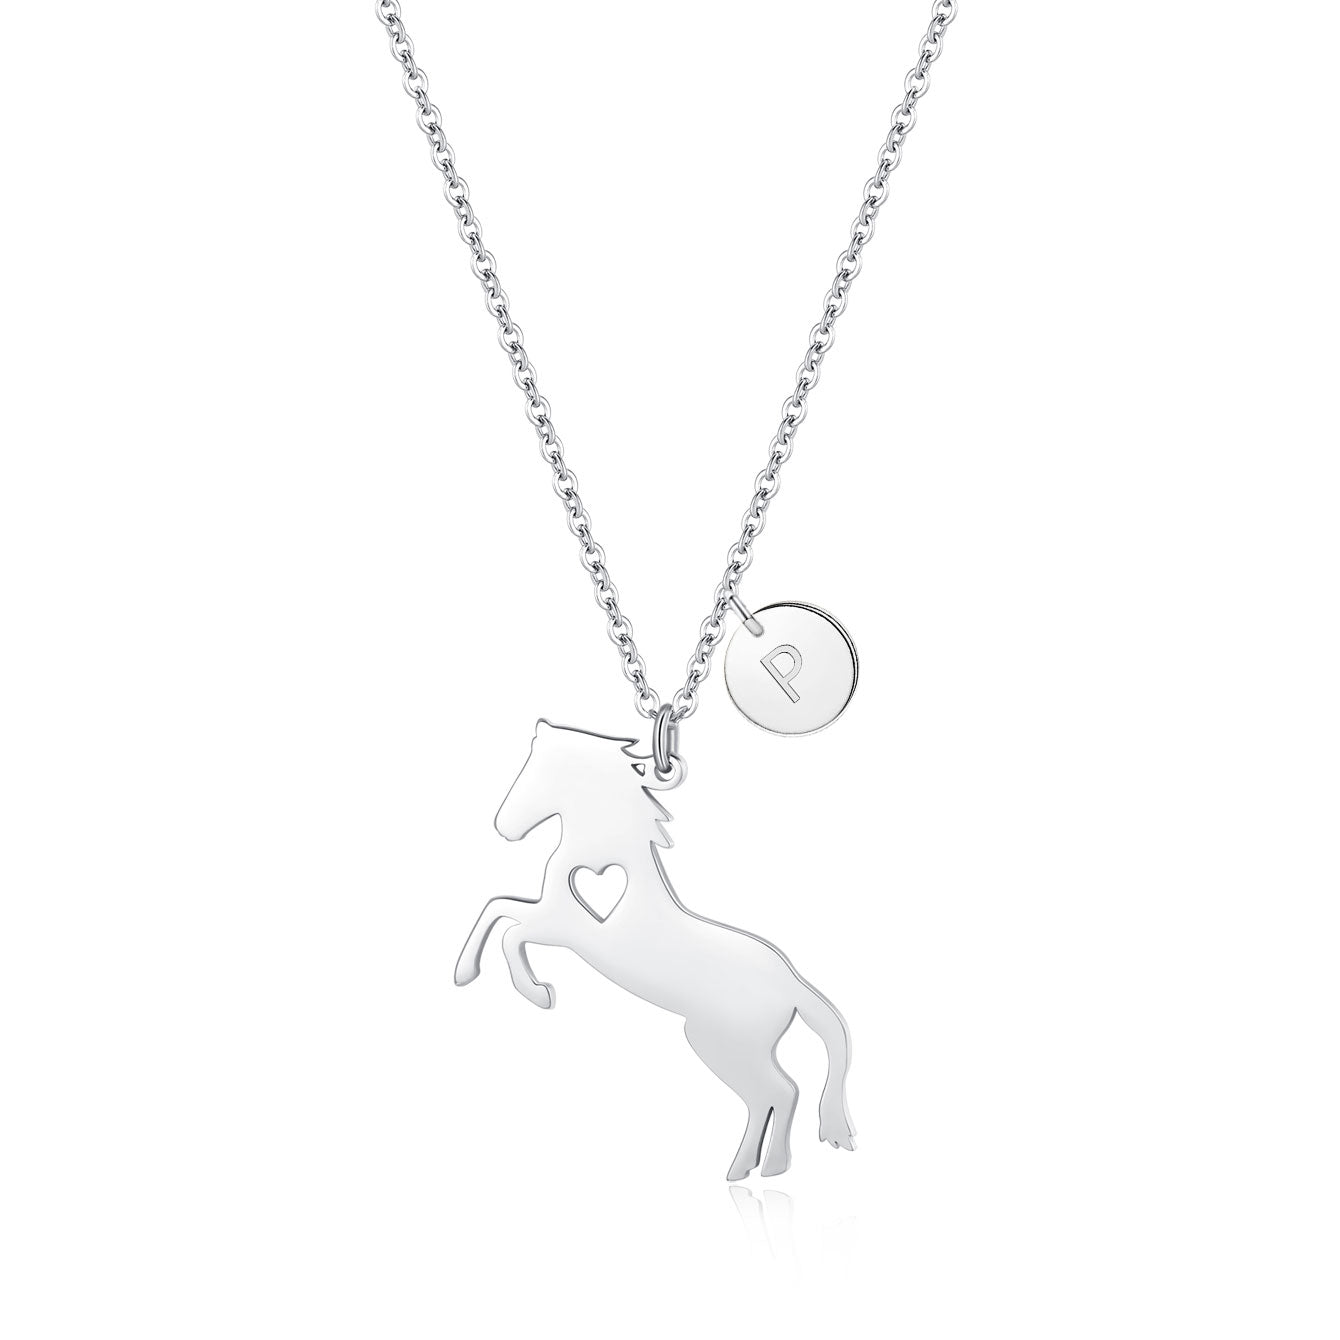 Charming Stainless Steel Horse Necklace - Horse Pendant with 26 Initials, Ideal Gift for Girls, Women, and Horse Enthusiasts of All Ages